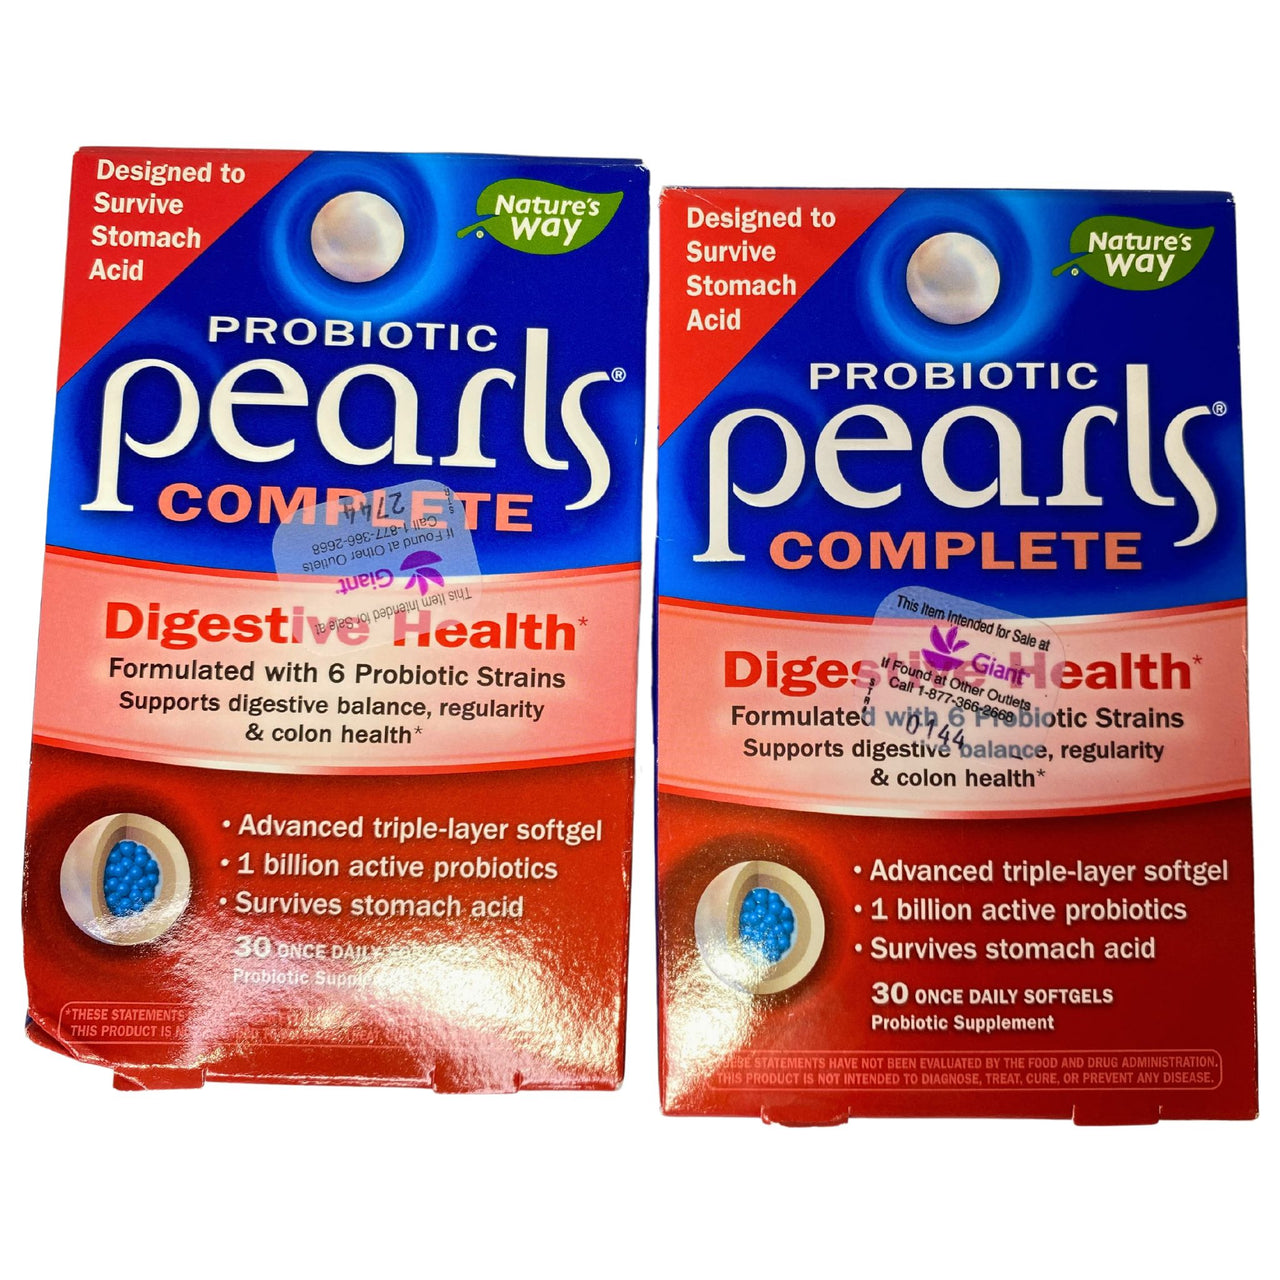 Probiotic Pearls Complete Digestive Health Supports Digestive